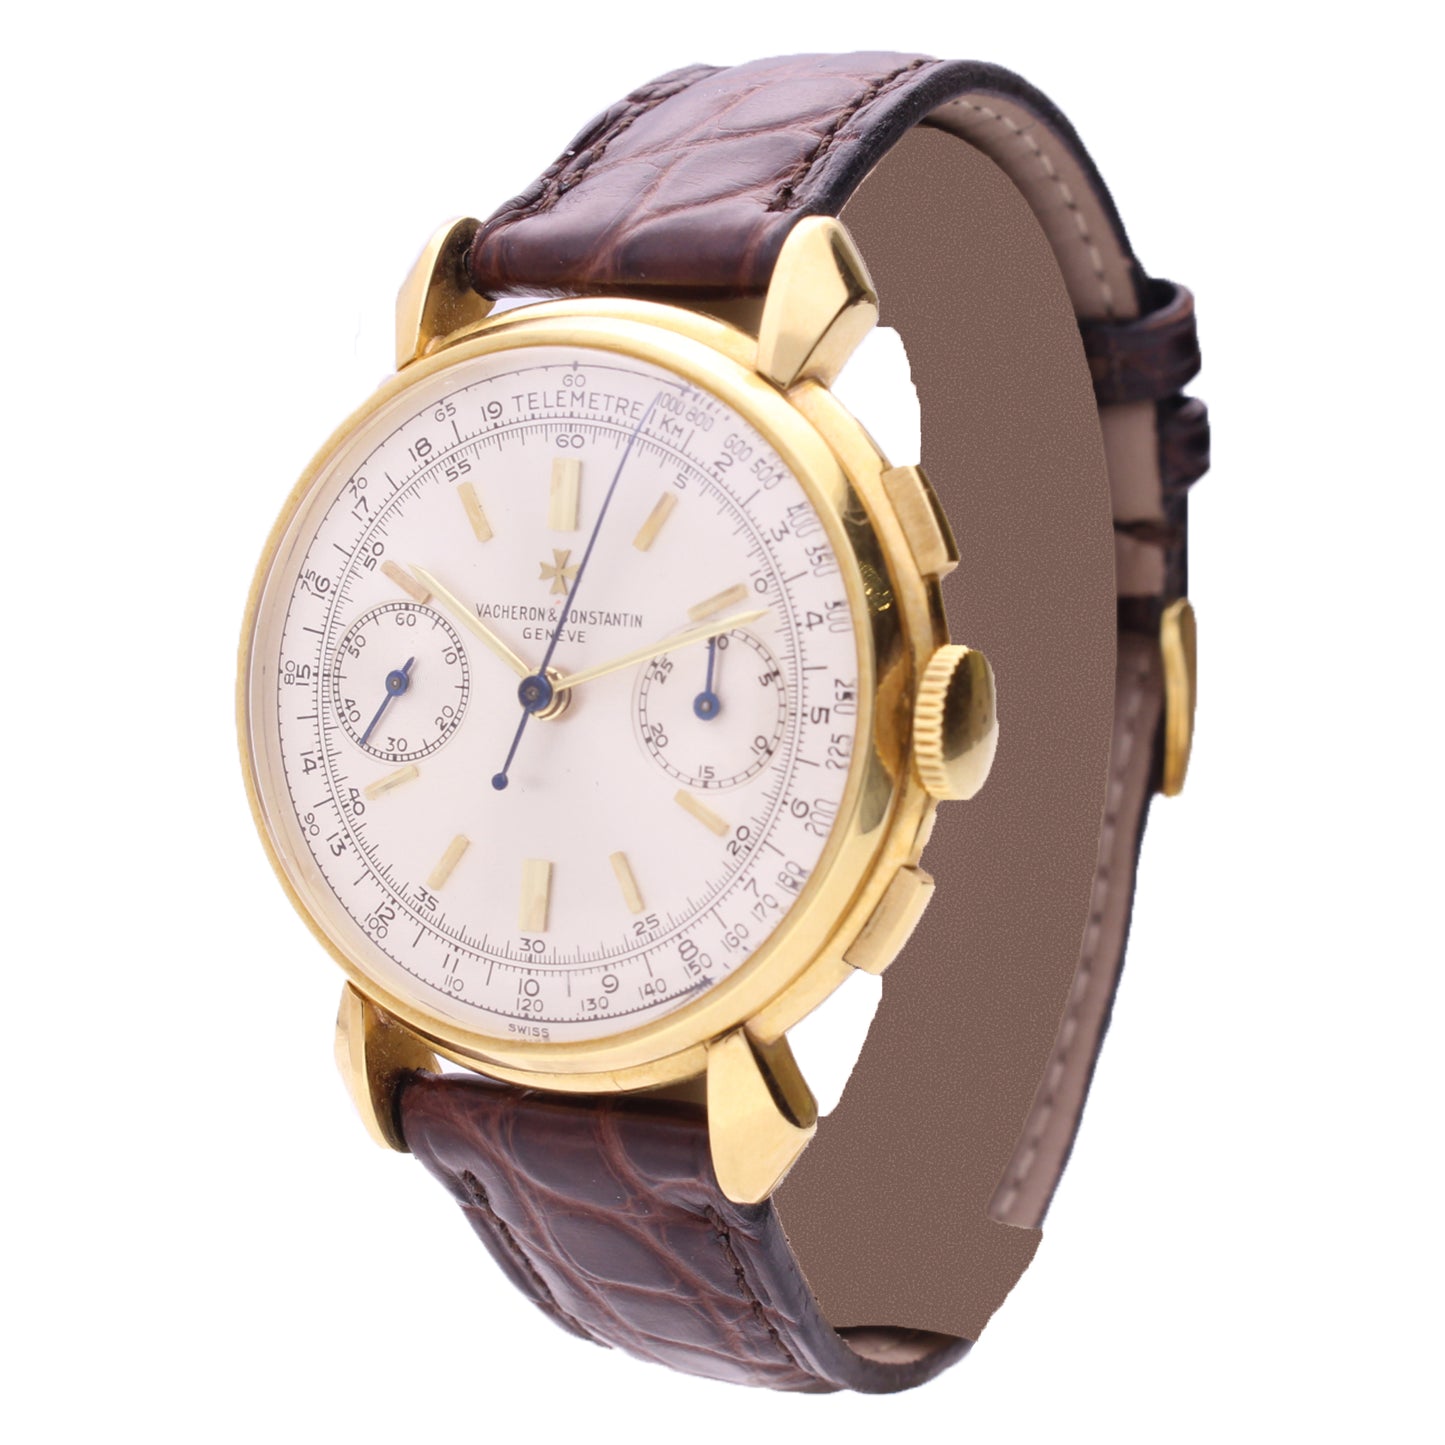 18ct yellow gold Vacheron & Constantin, reference 4178 chronograph wristwatch. Made 1950